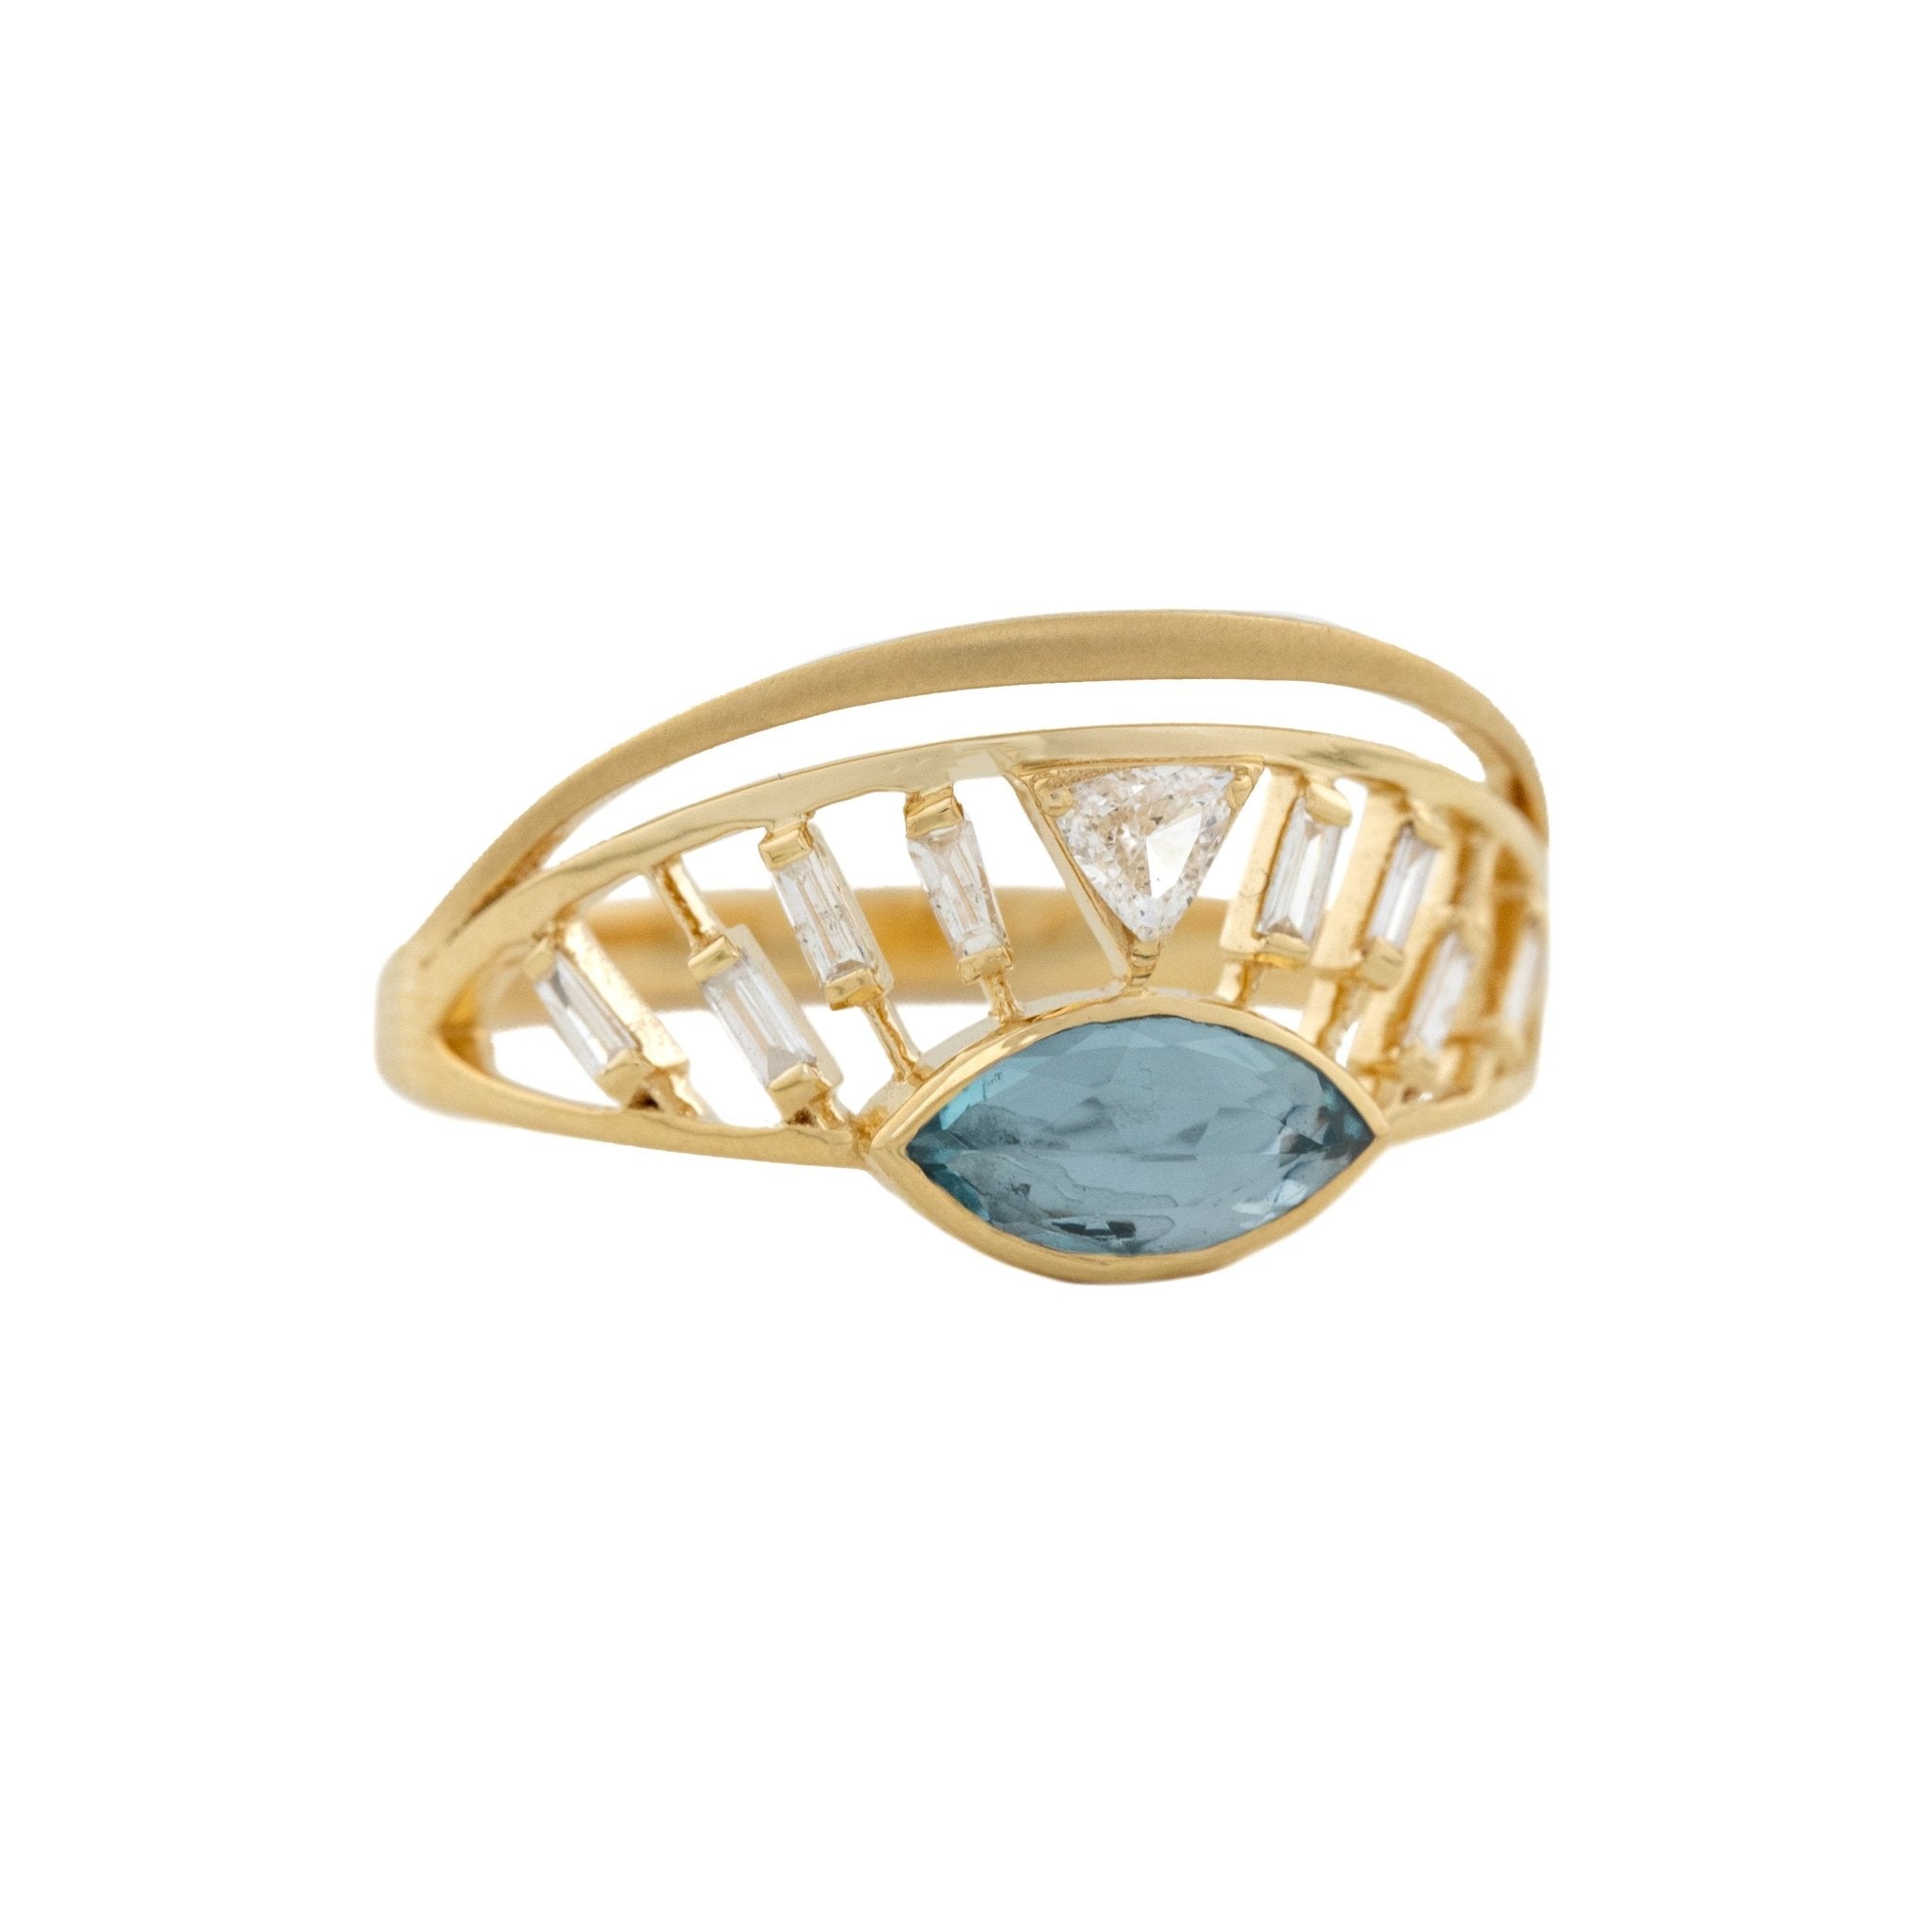 Marquise Aquamarine &quot;Sunrise&quot; Ring with Diamond Details - Peridot Fine Jewelry - Celine Daoust